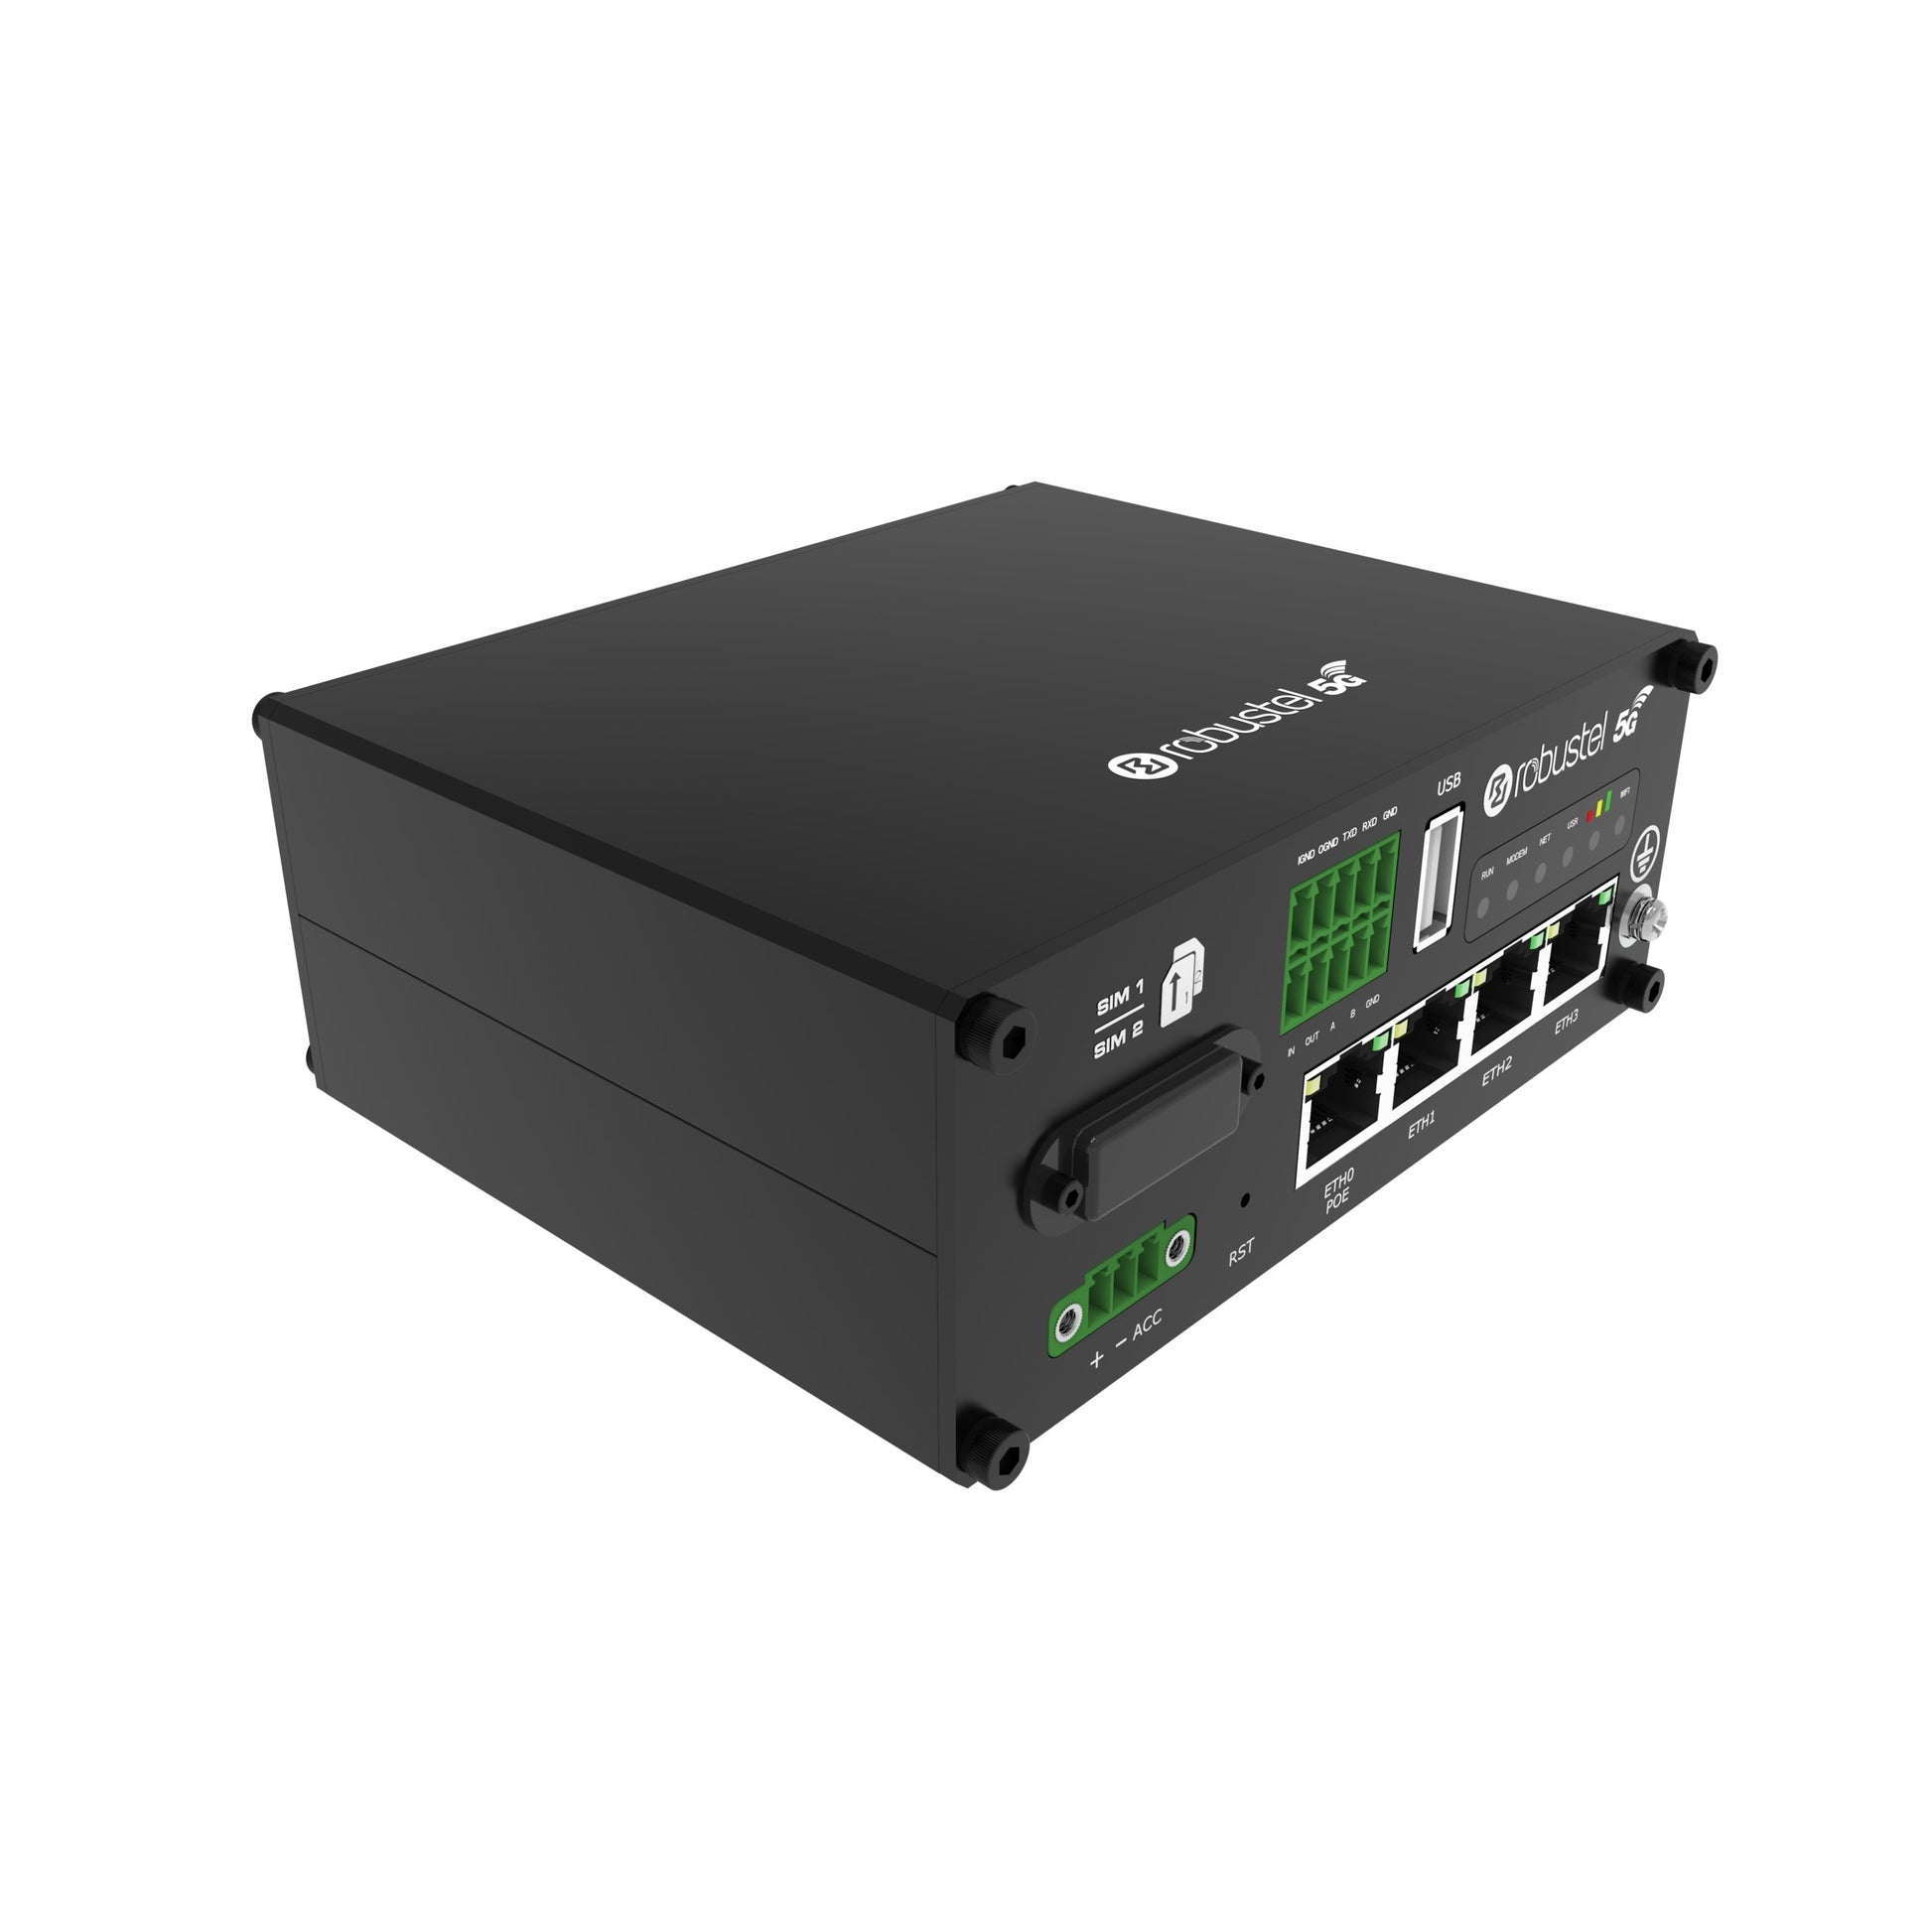 Robustel R5020 5G IoT Router Global